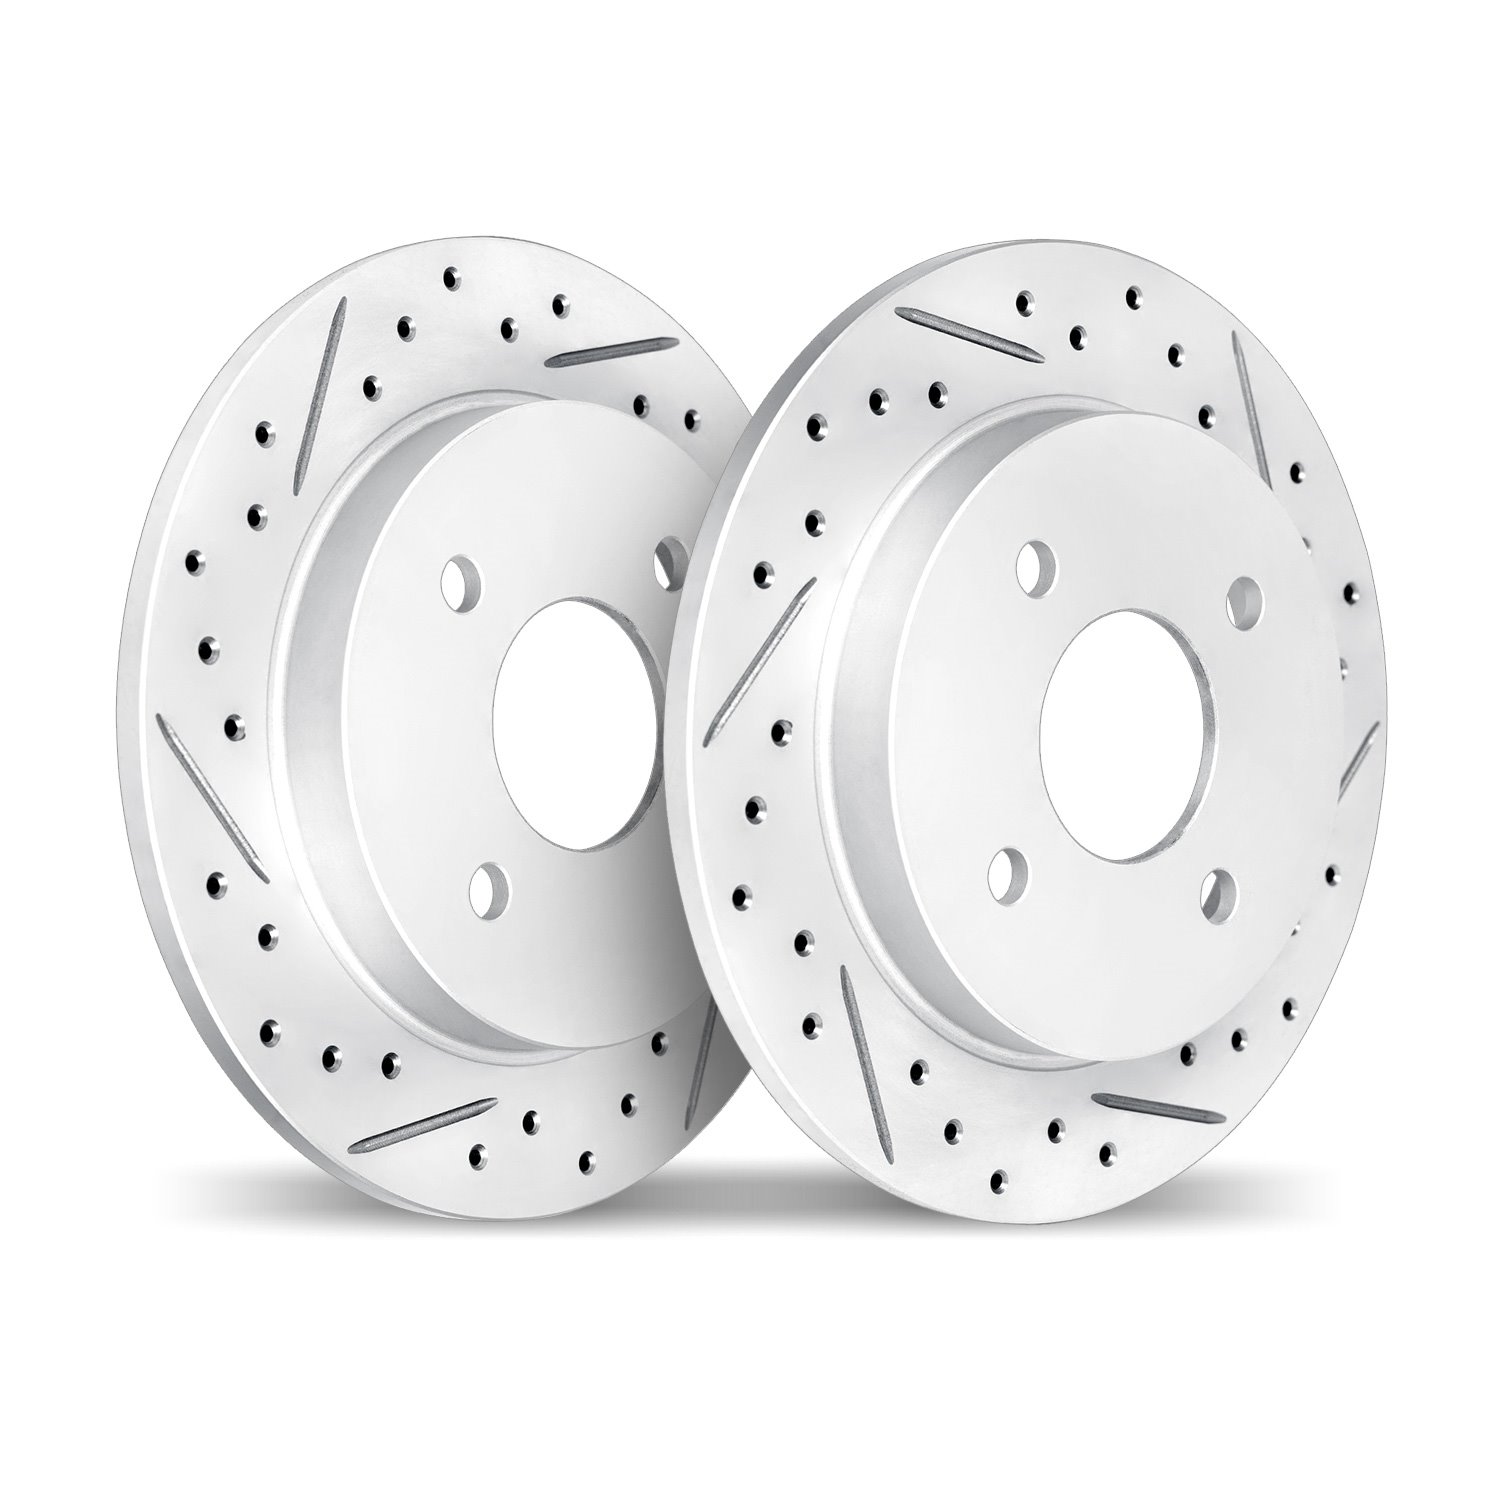 2002-80045 Geoperformance Drilled/Slotted Brake Rotors, 2001-2005 Ford/Lincoln/Mercury/Mazda, Position: Rear